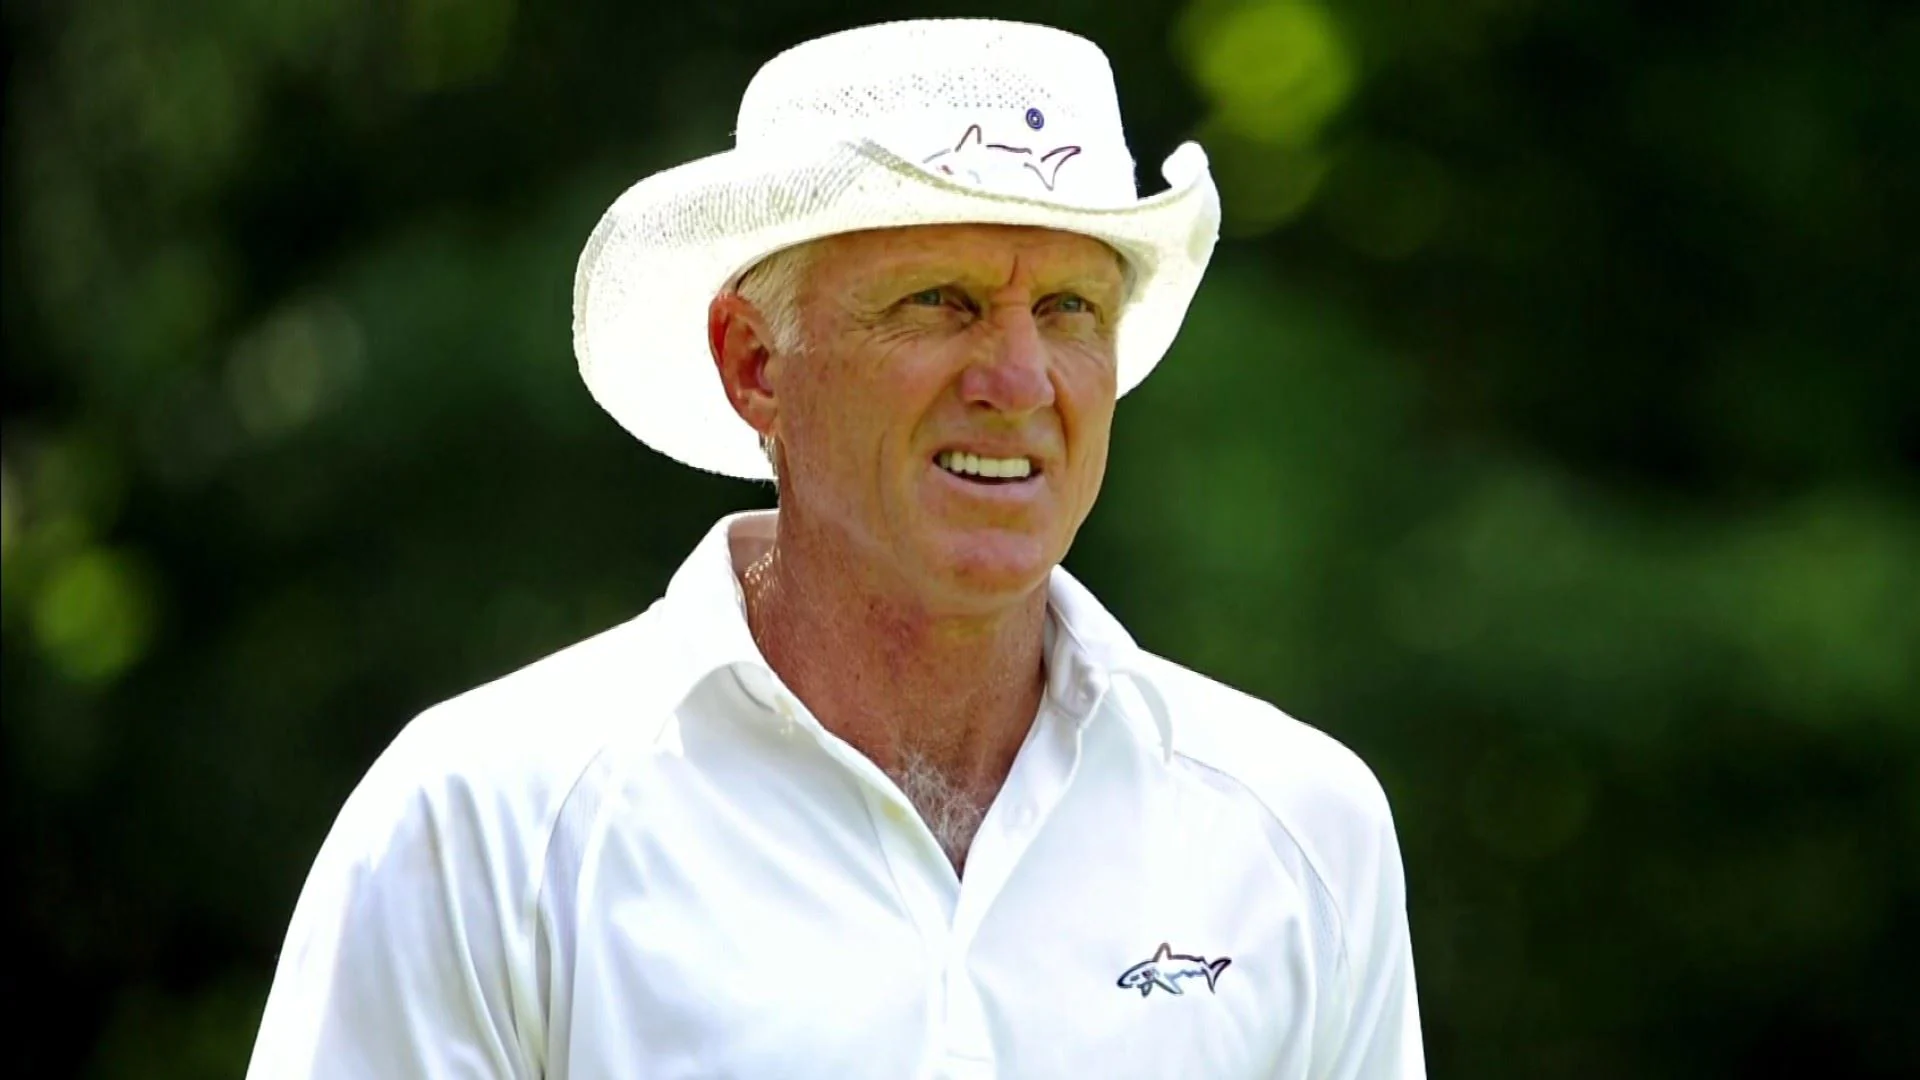 Greg Norman/LIV Golf challenge PGA Tour’s legal right to ban players in memo